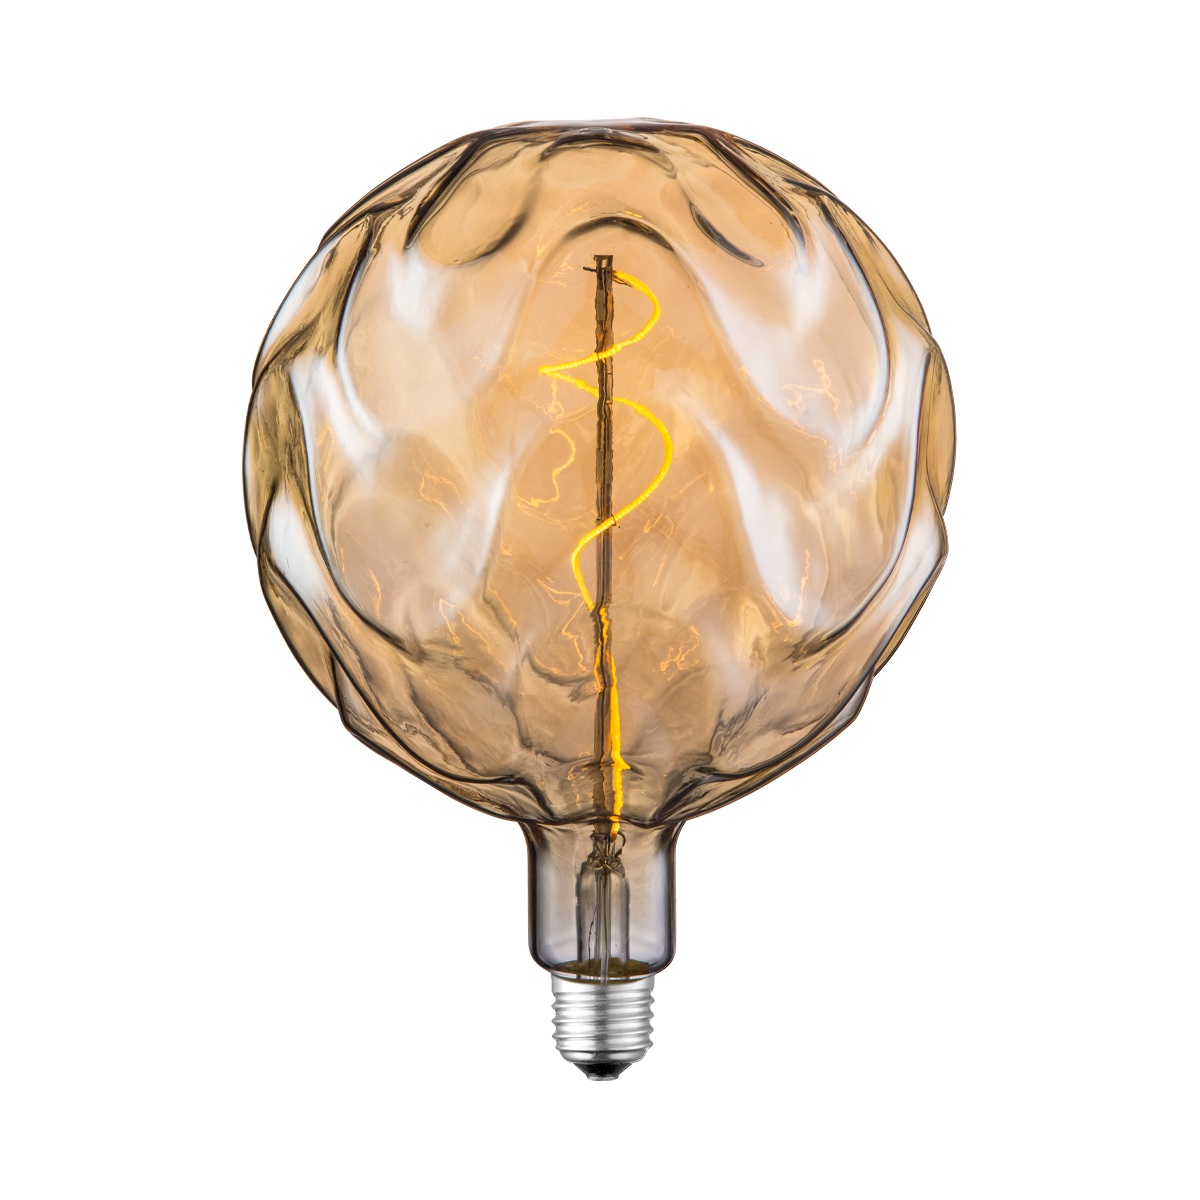 Tangla lighting - TLB-8115-04AM - LED Light Bulb Single Spiral filament - special 4W amber - supple - dimmable - E27